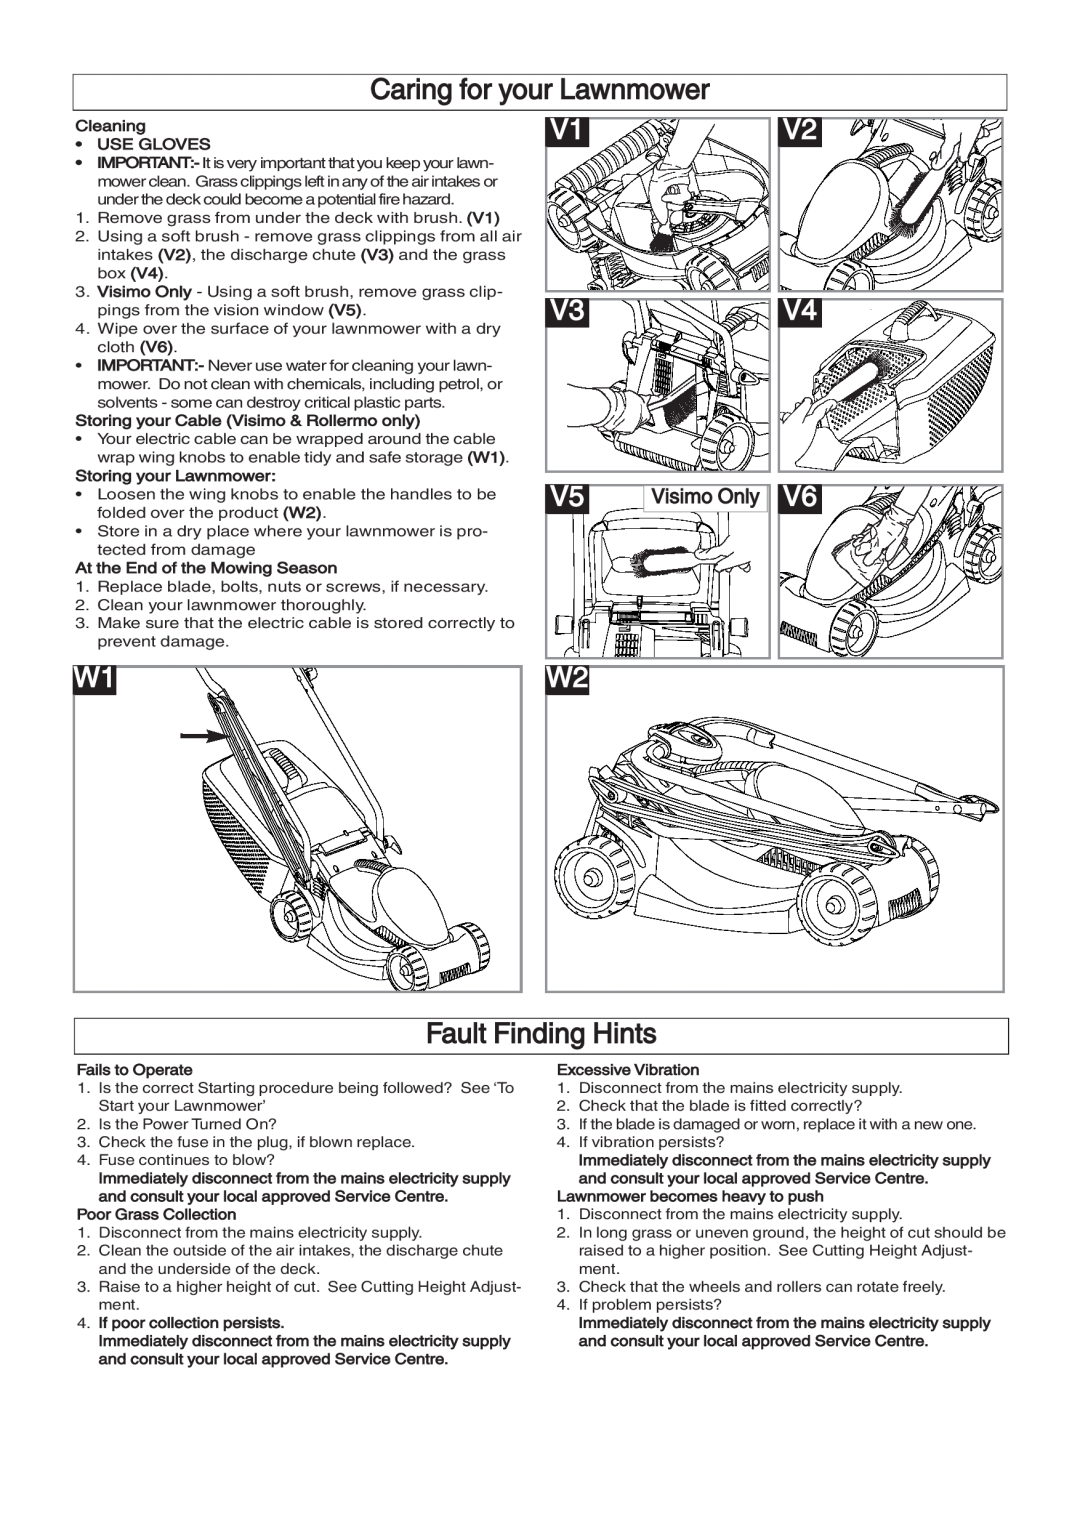 Flymo VTR32, VM032, RM032 manual Caring for your Lawnmower, Fault Finding Hints, Visimo Only 